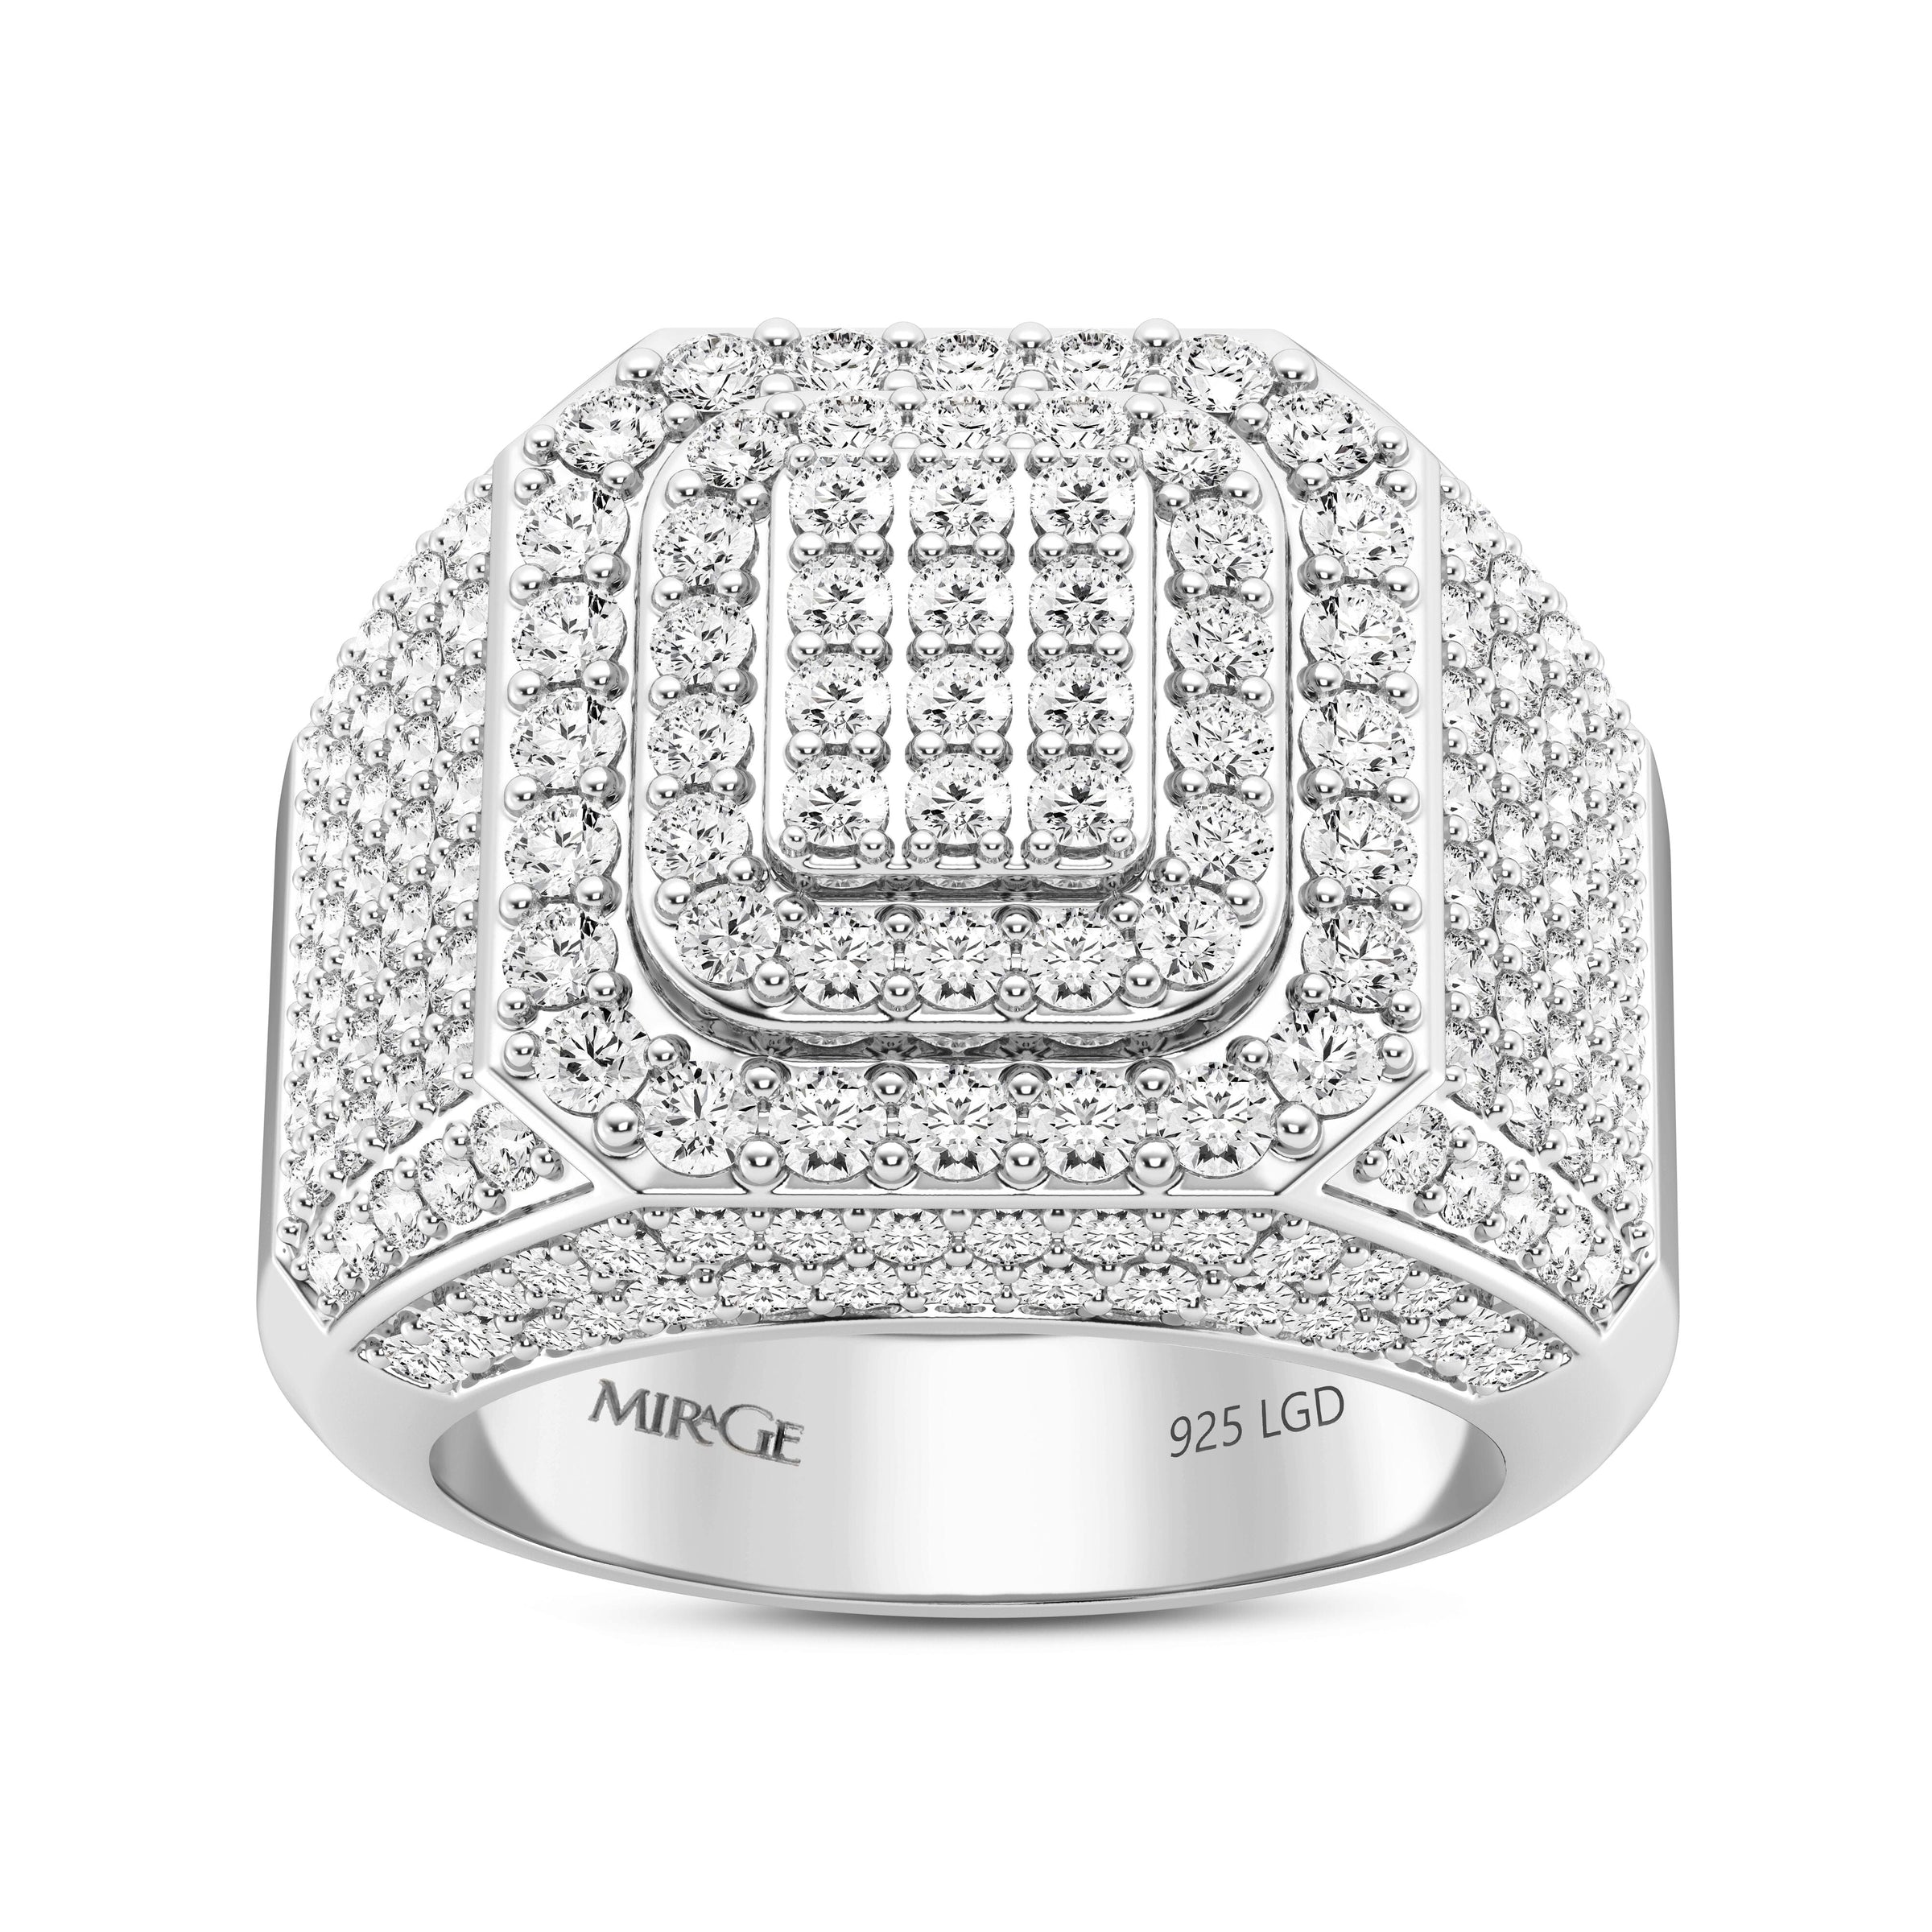 Men's Double Halo Ring with 3.35ct of Laboratory Grown Diamonds in Mirage Sterling Silver and Platinum Rings Bevilles 